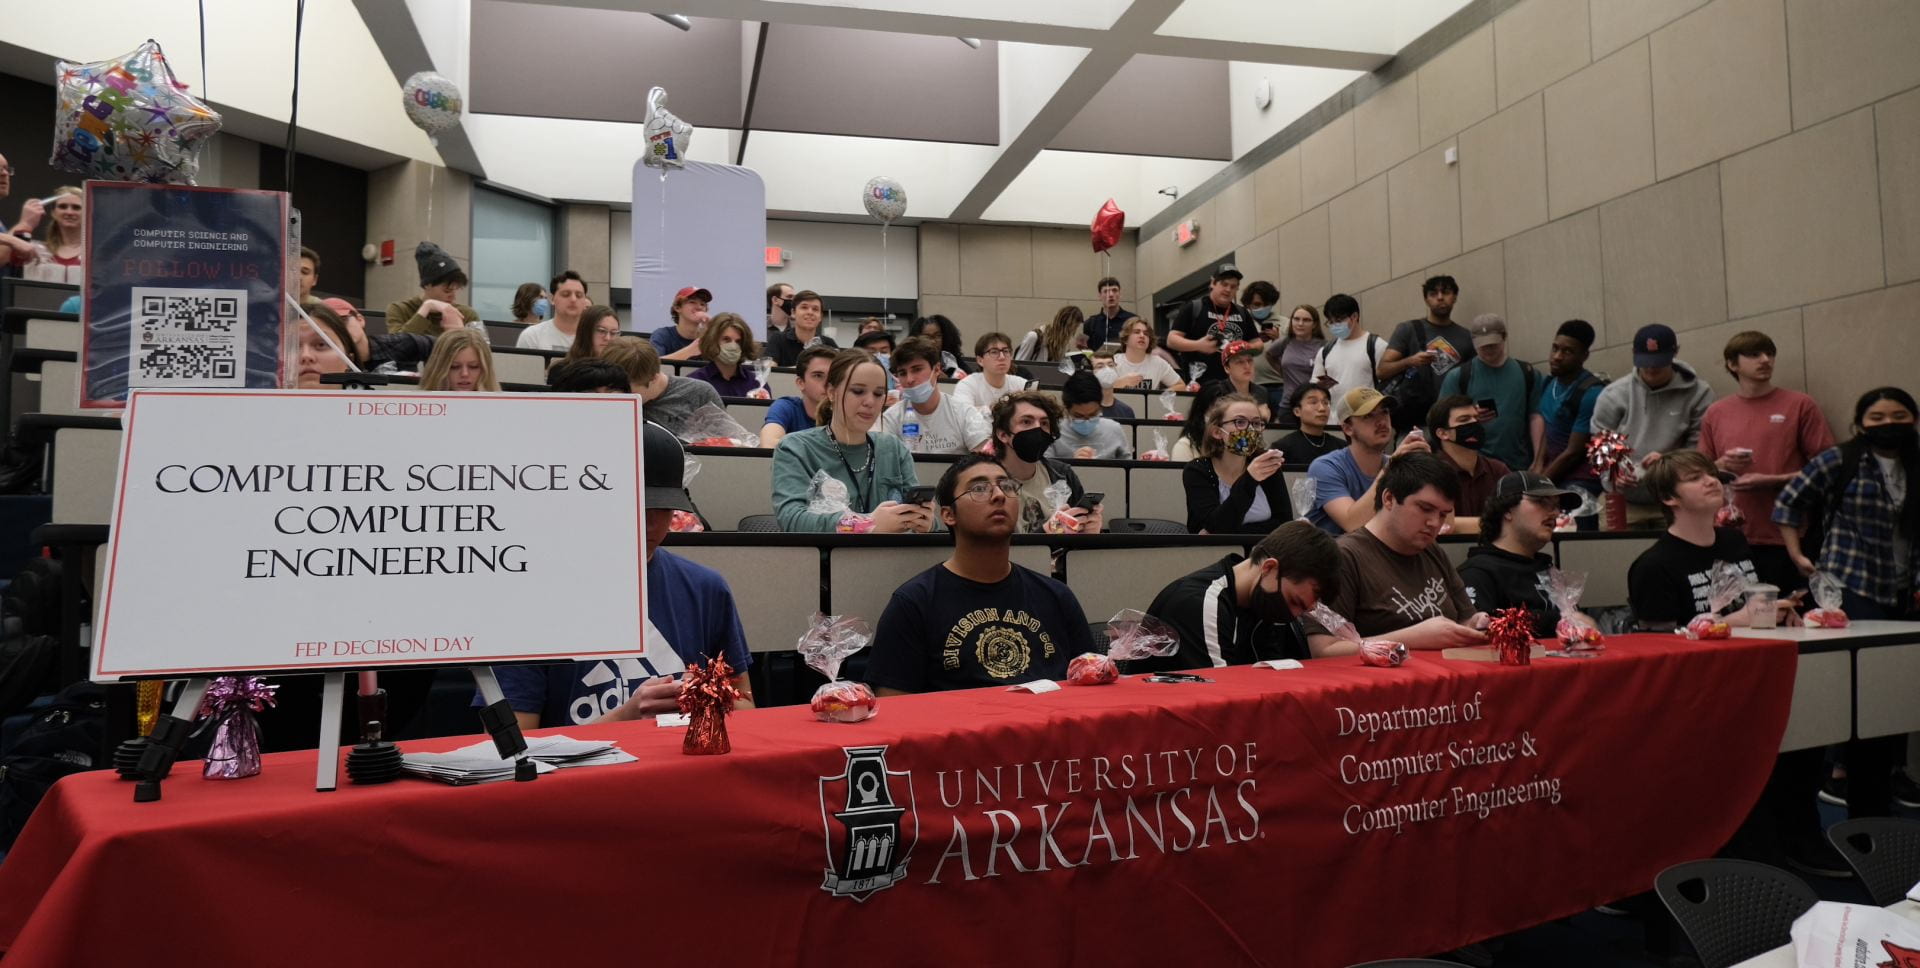 Students assemble in a College of Engineering auditorium March 4 to declare which major they have chosen in a tradition known as Decision Day.